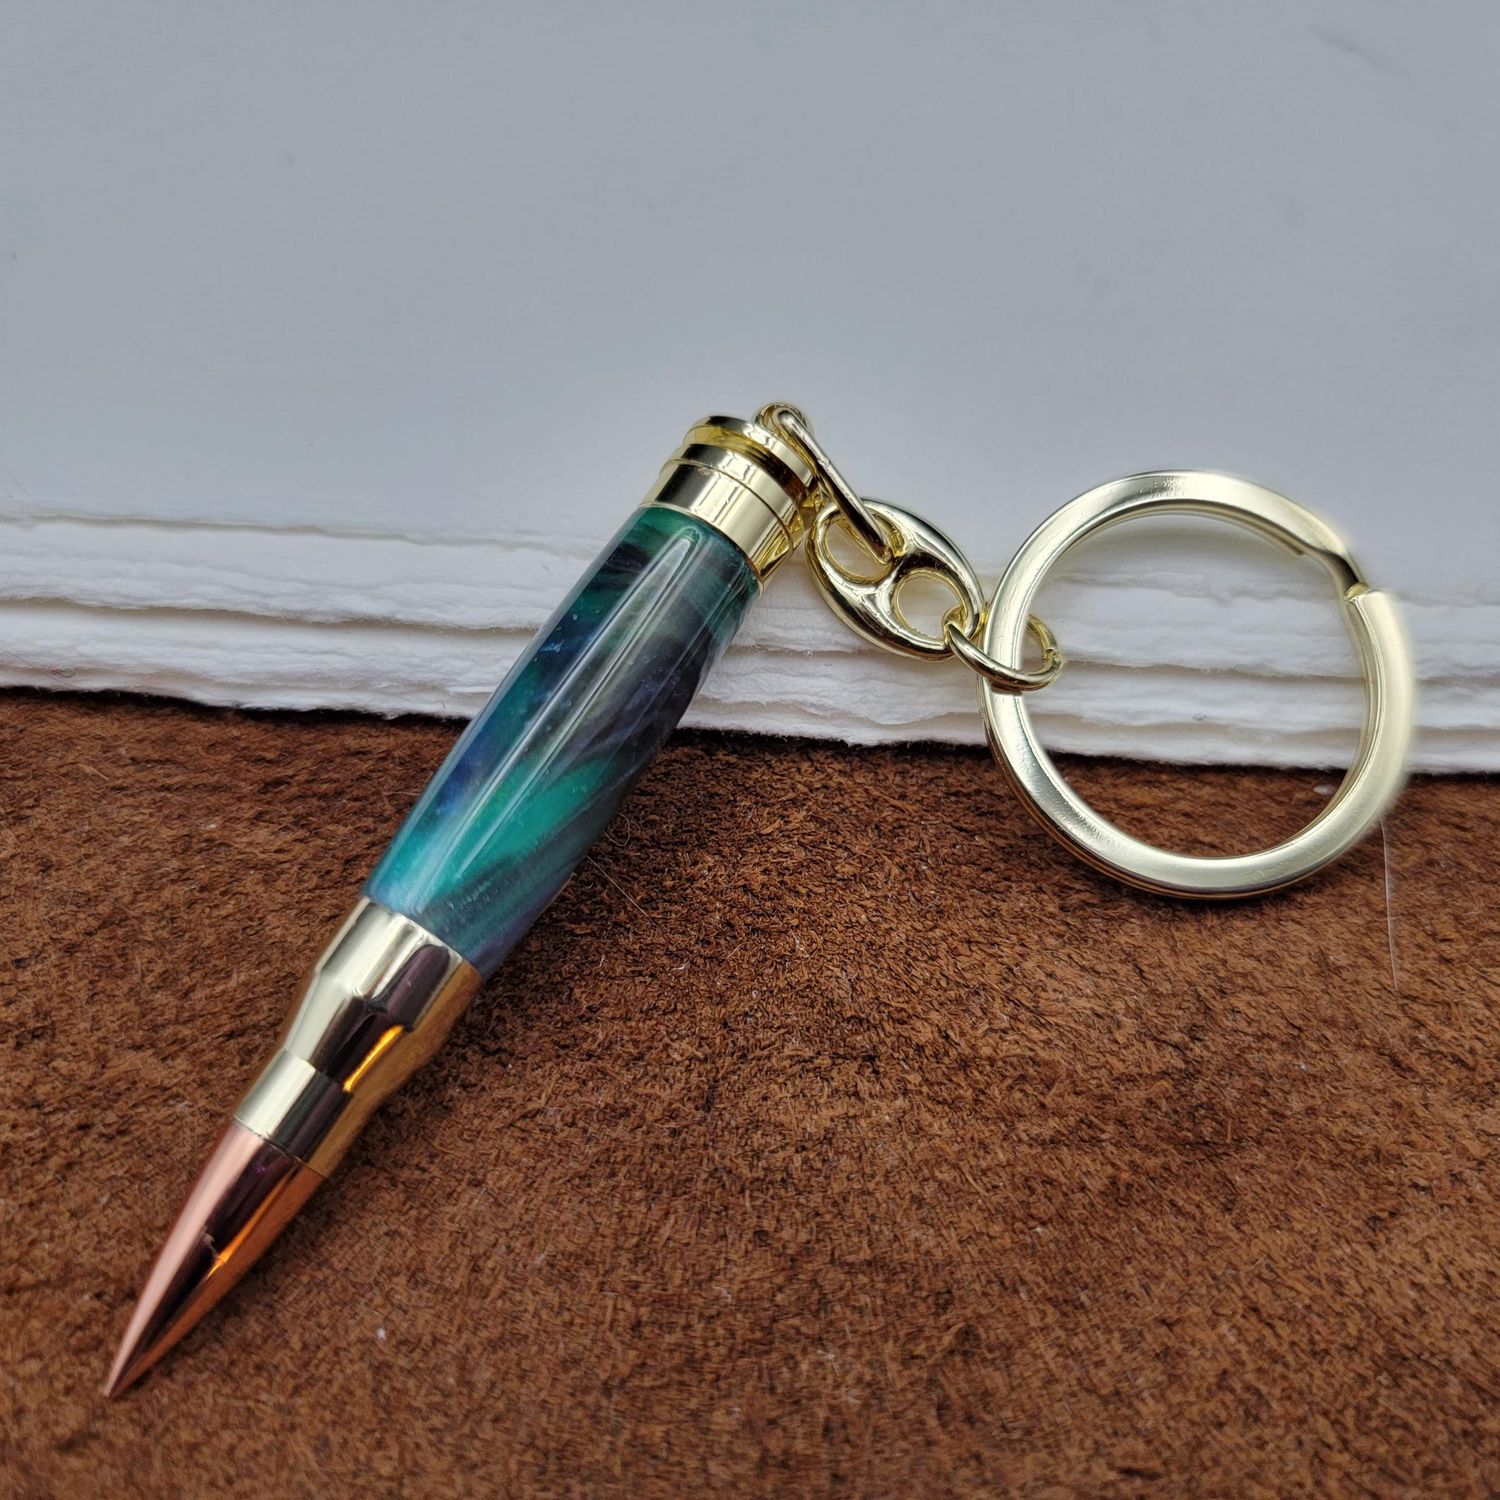 Green Bullet Key Chain with Gold Finish